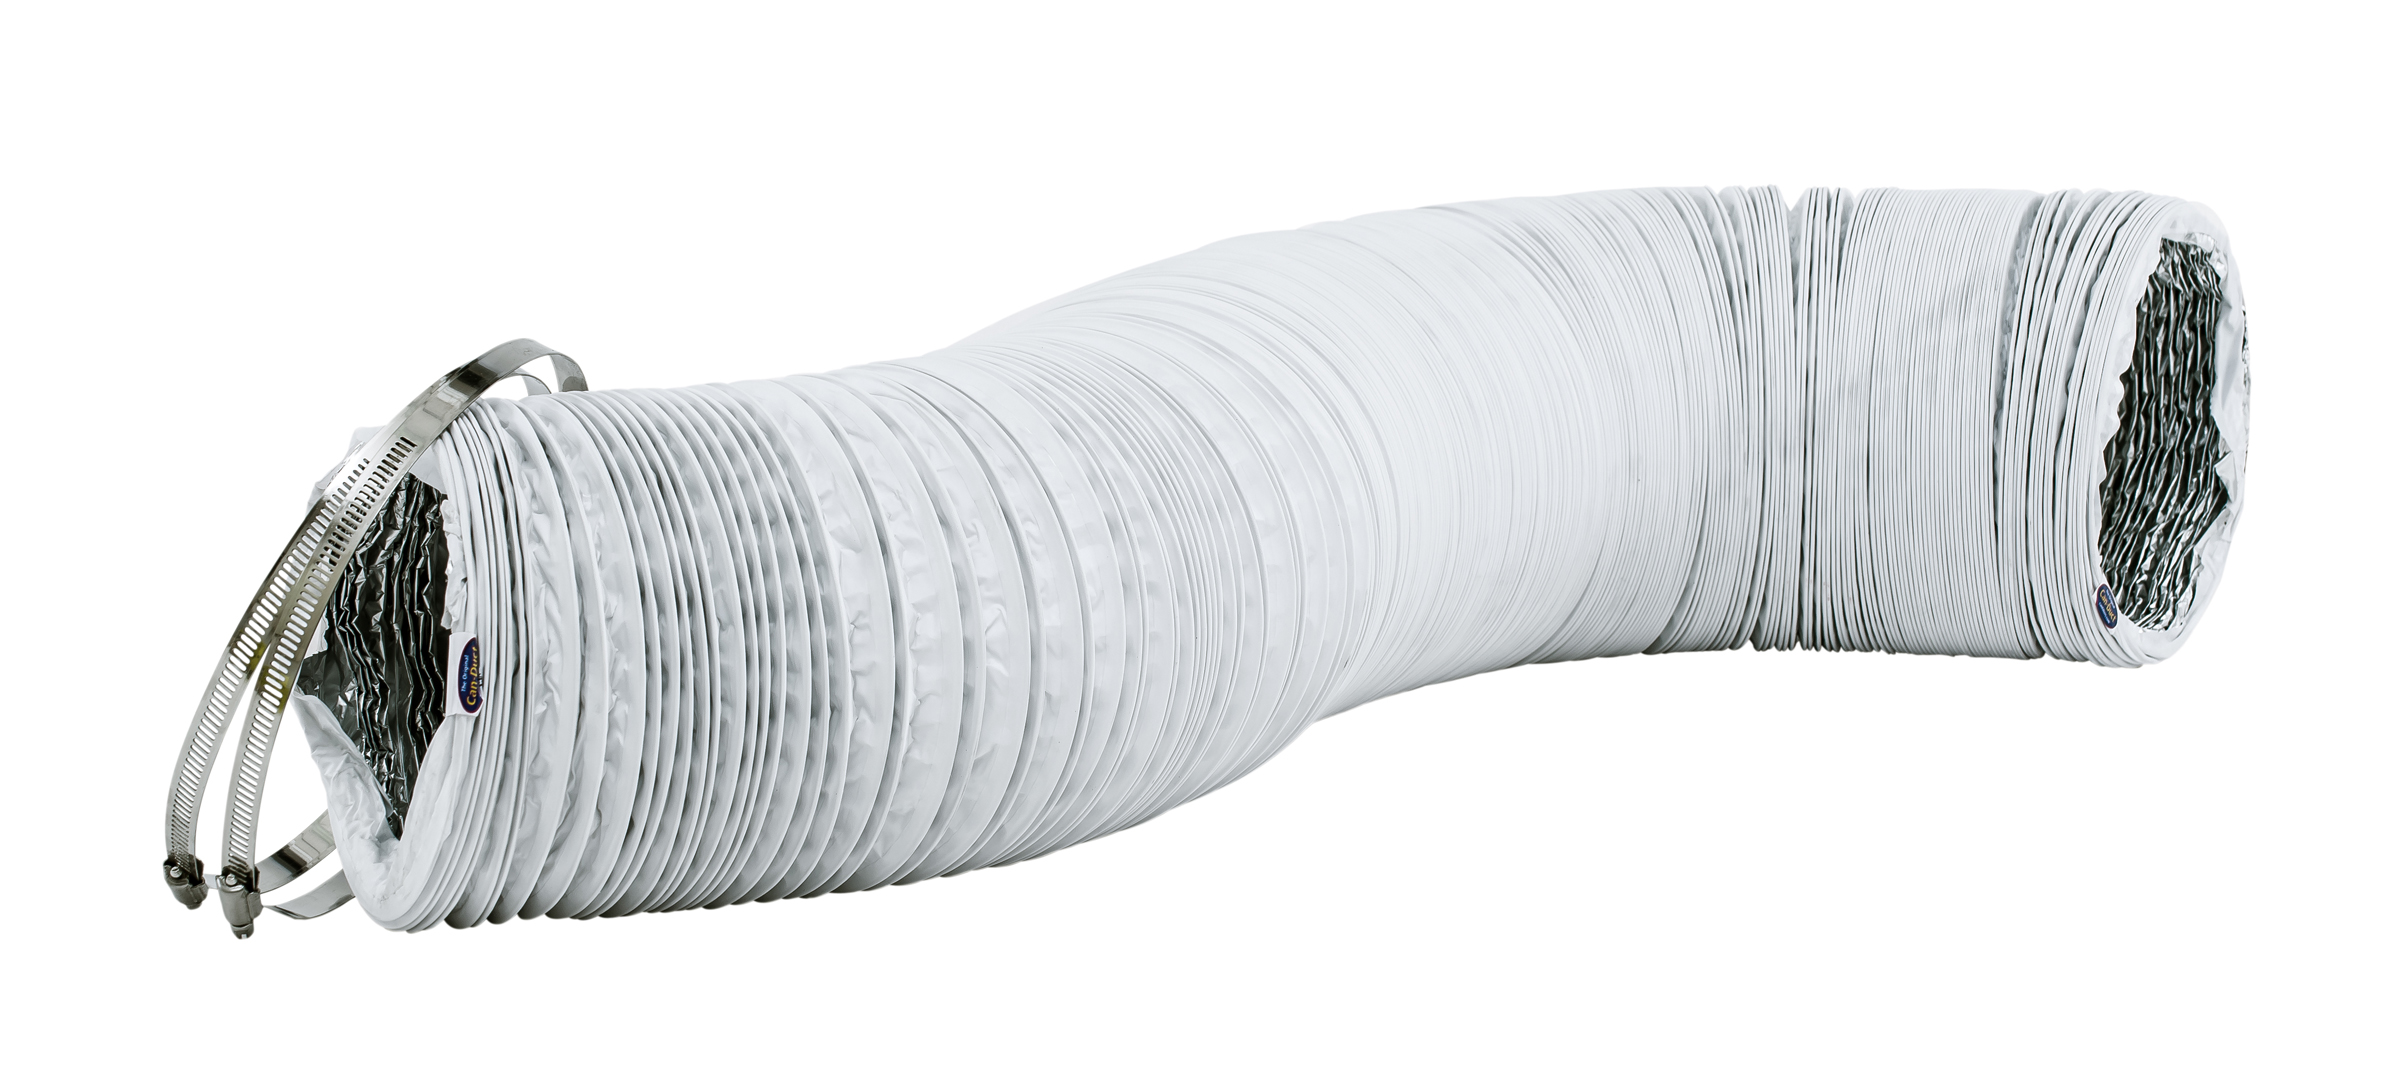 Can MAX-DUCT Vinyl Ducting, 4" - 25'